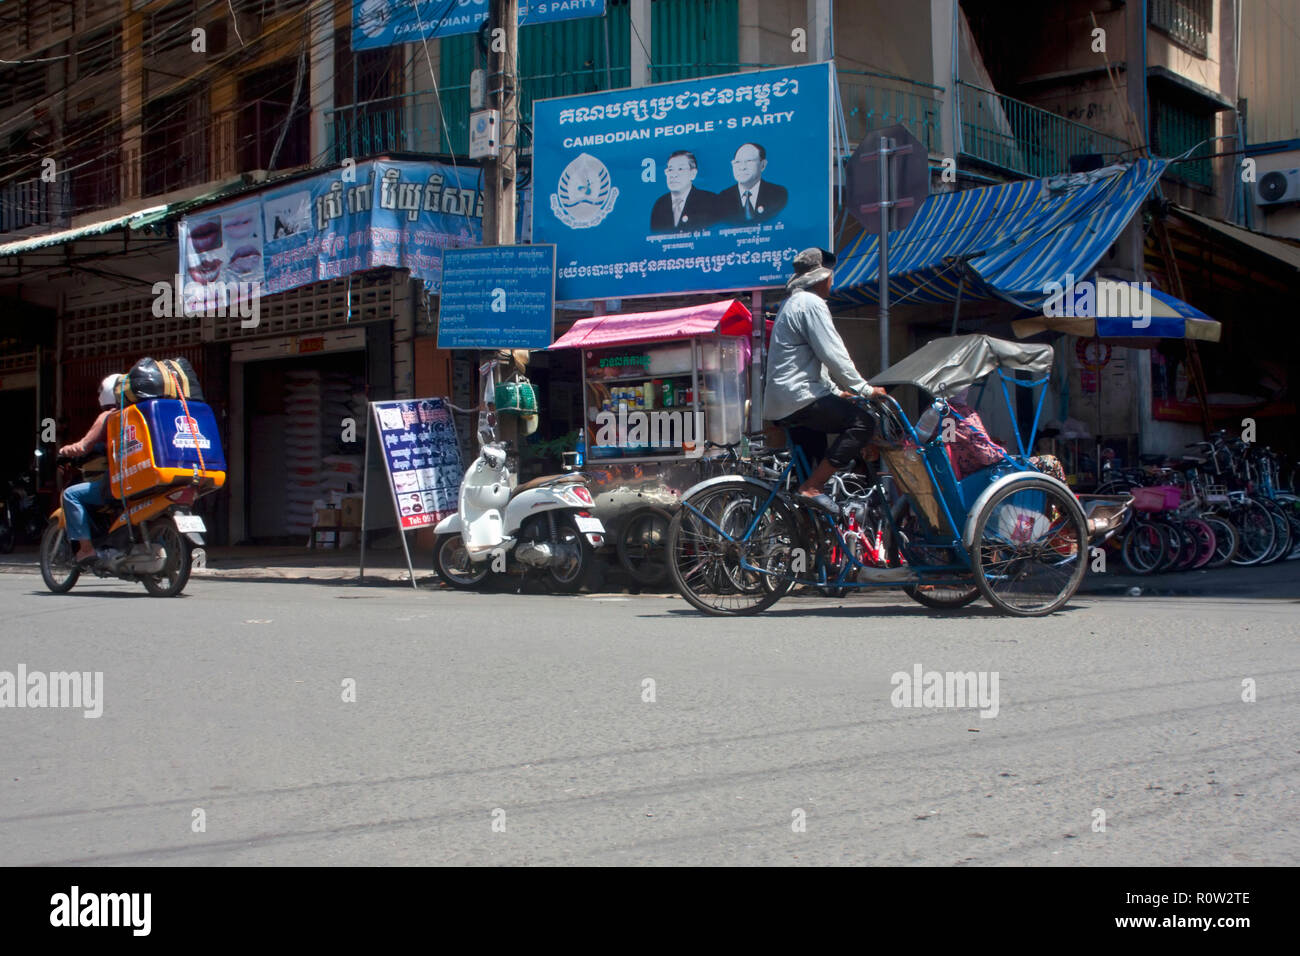 A cyclo & a motorcycle delivery man are riding on a street dominated by a Cambodian People's party campaign sign in Phnom Penh, Cambodia. Stock Photo